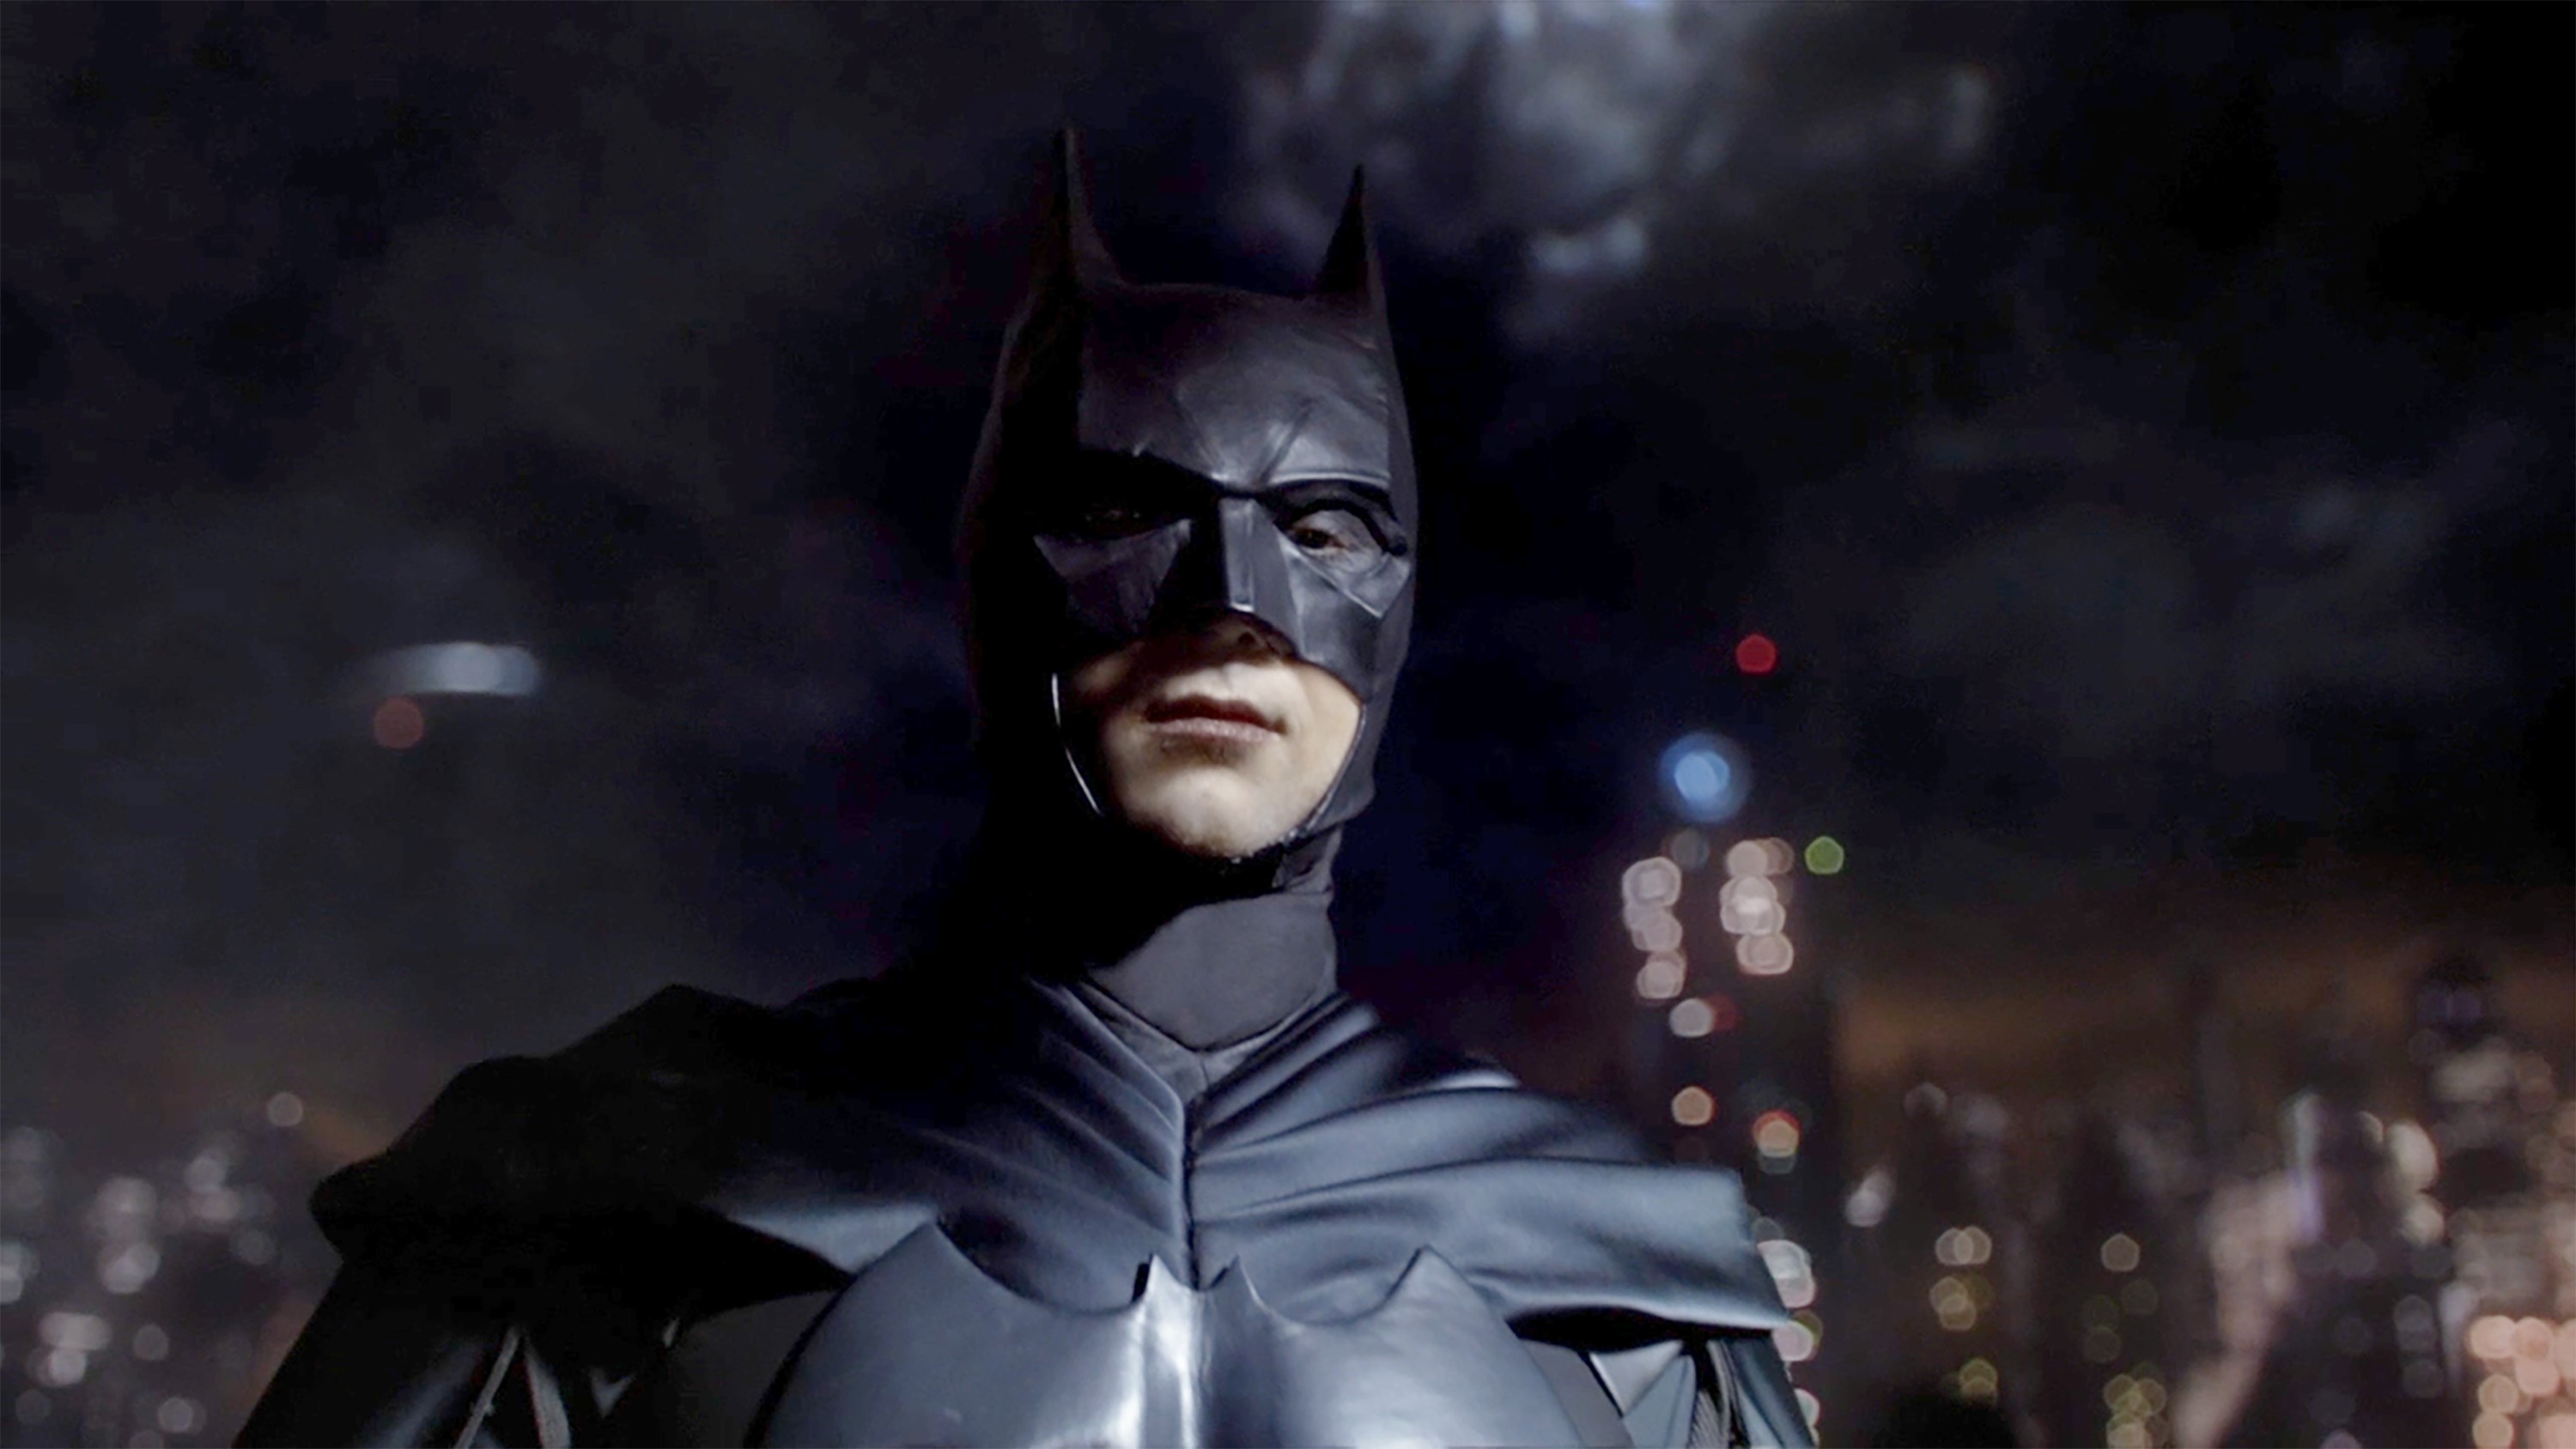 GOTHAM: Come Get Your Best Look At BATMAN From The Series Finale In These Two Officially Released Stills